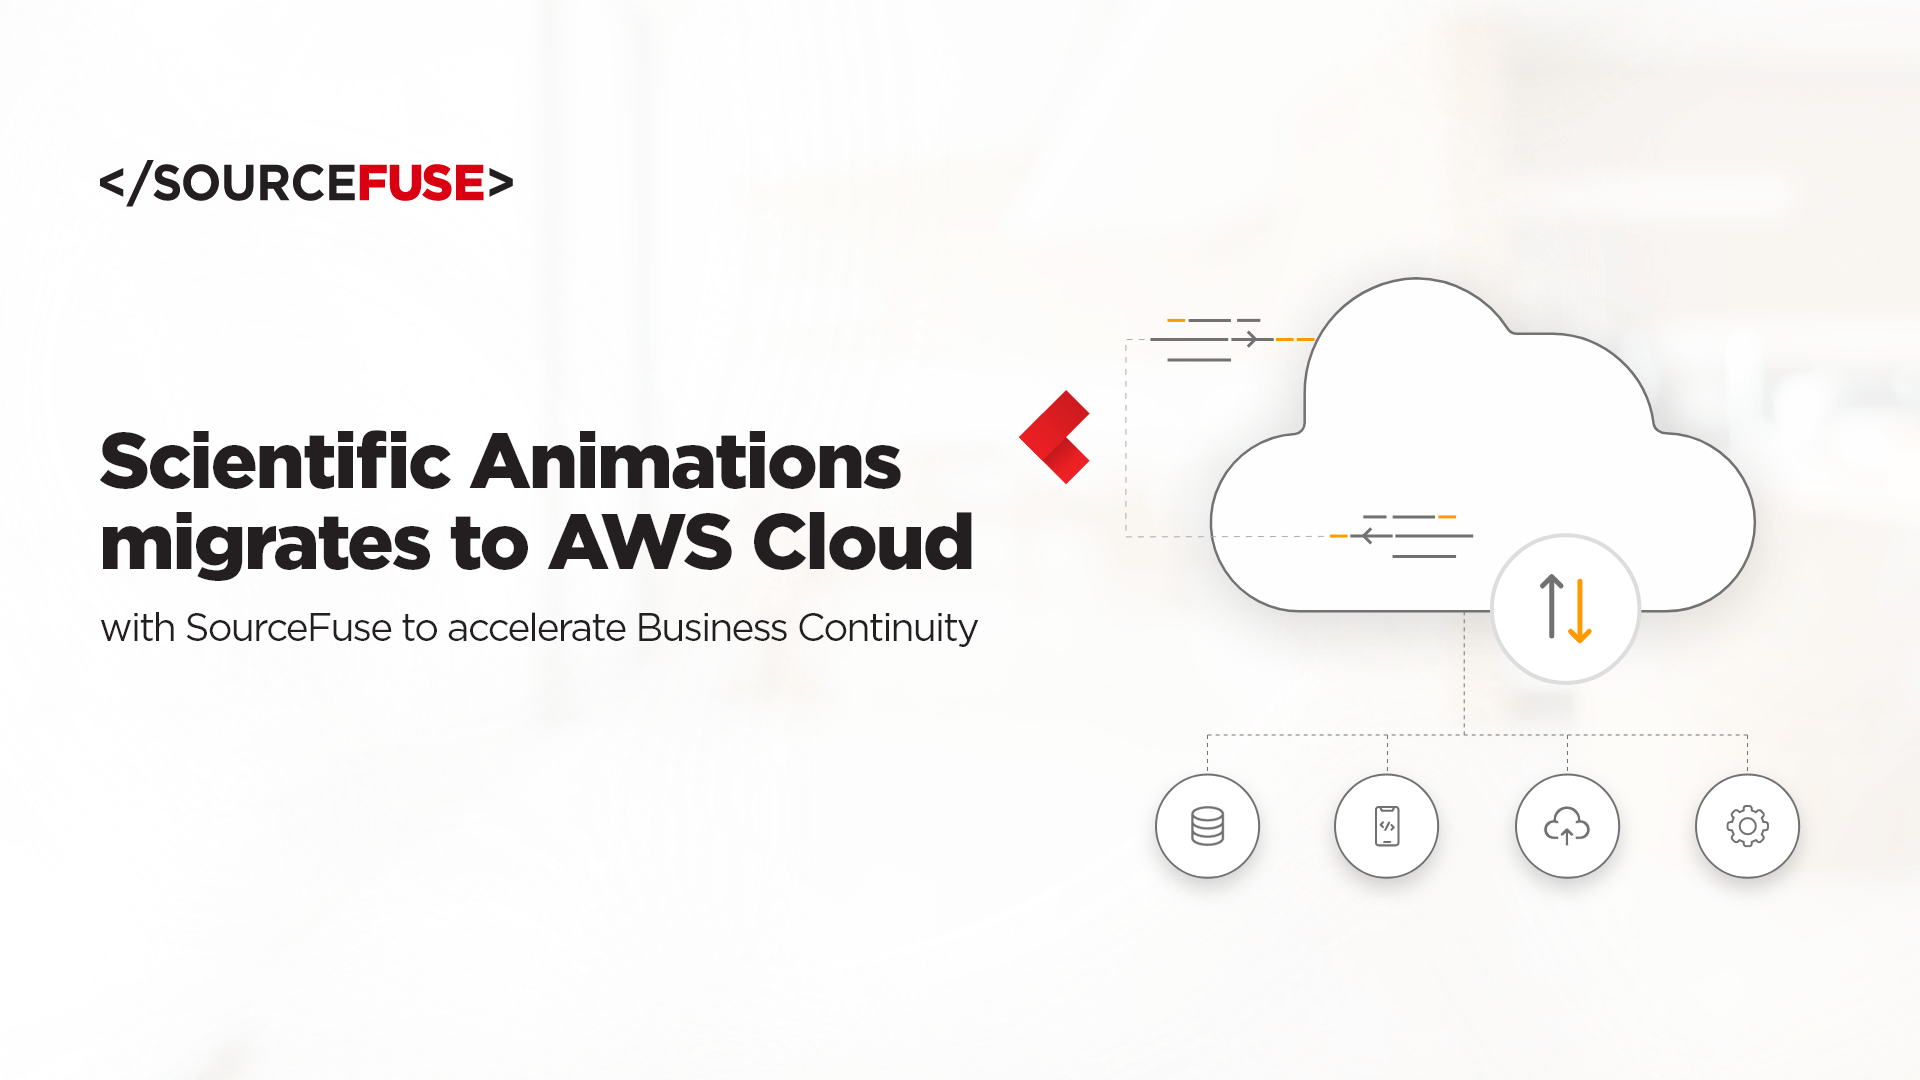 Scientific Animations migrates to AWS Cloud with SourceFuse to accelerate Business Continuity